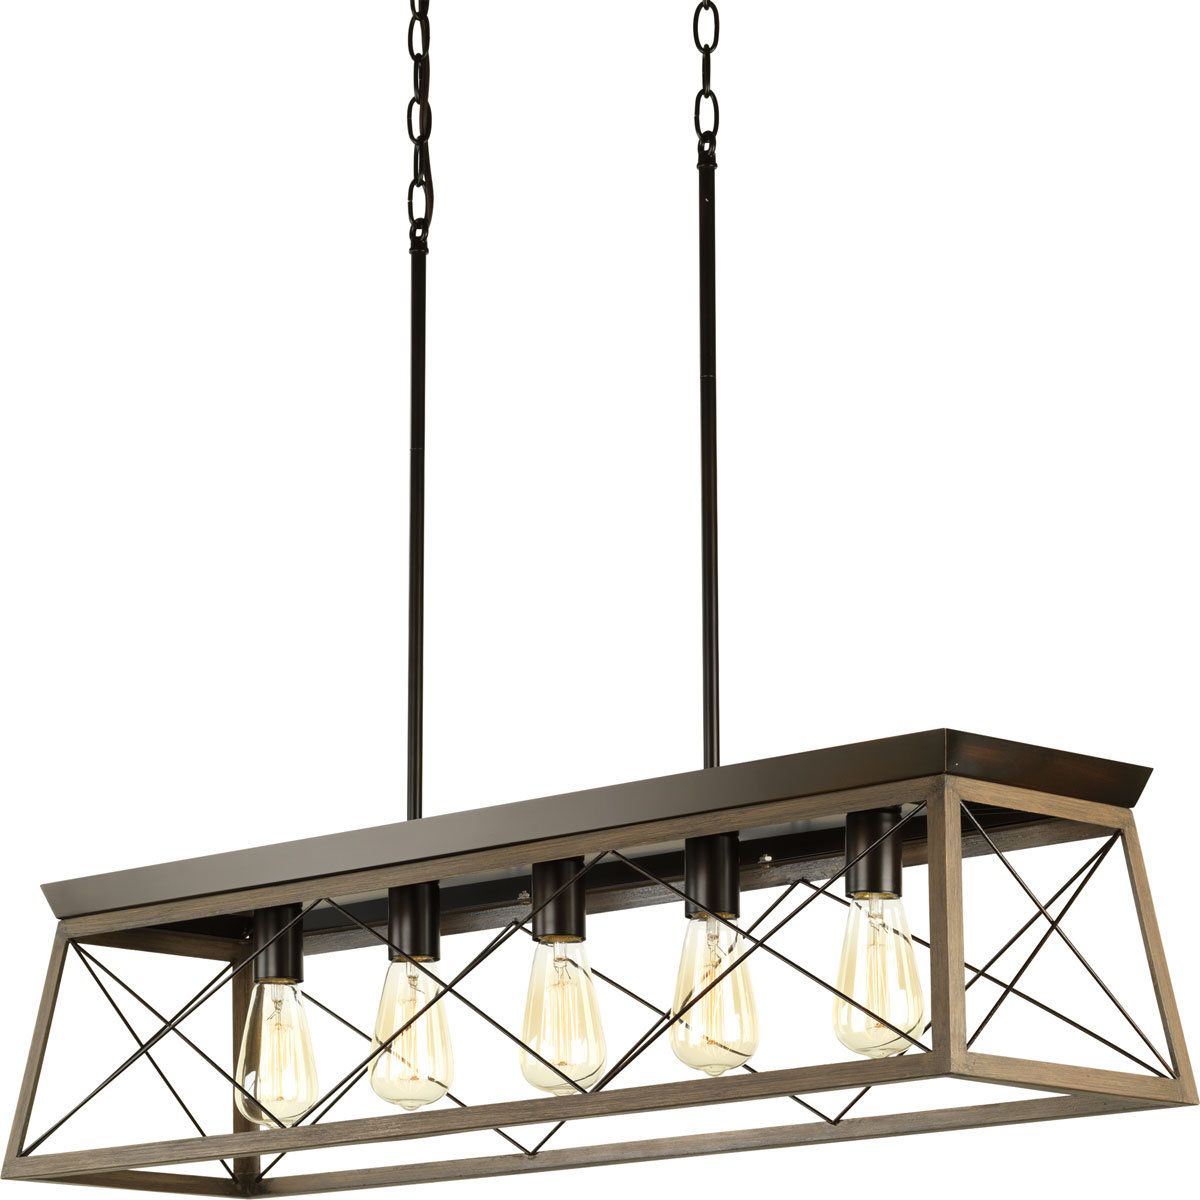 Well Liked Euclid 2 Light Kitchen Island Linear Pendants Regarding Delon 5 Light Kitchen Island Linear Pendant (View 11 of 20)